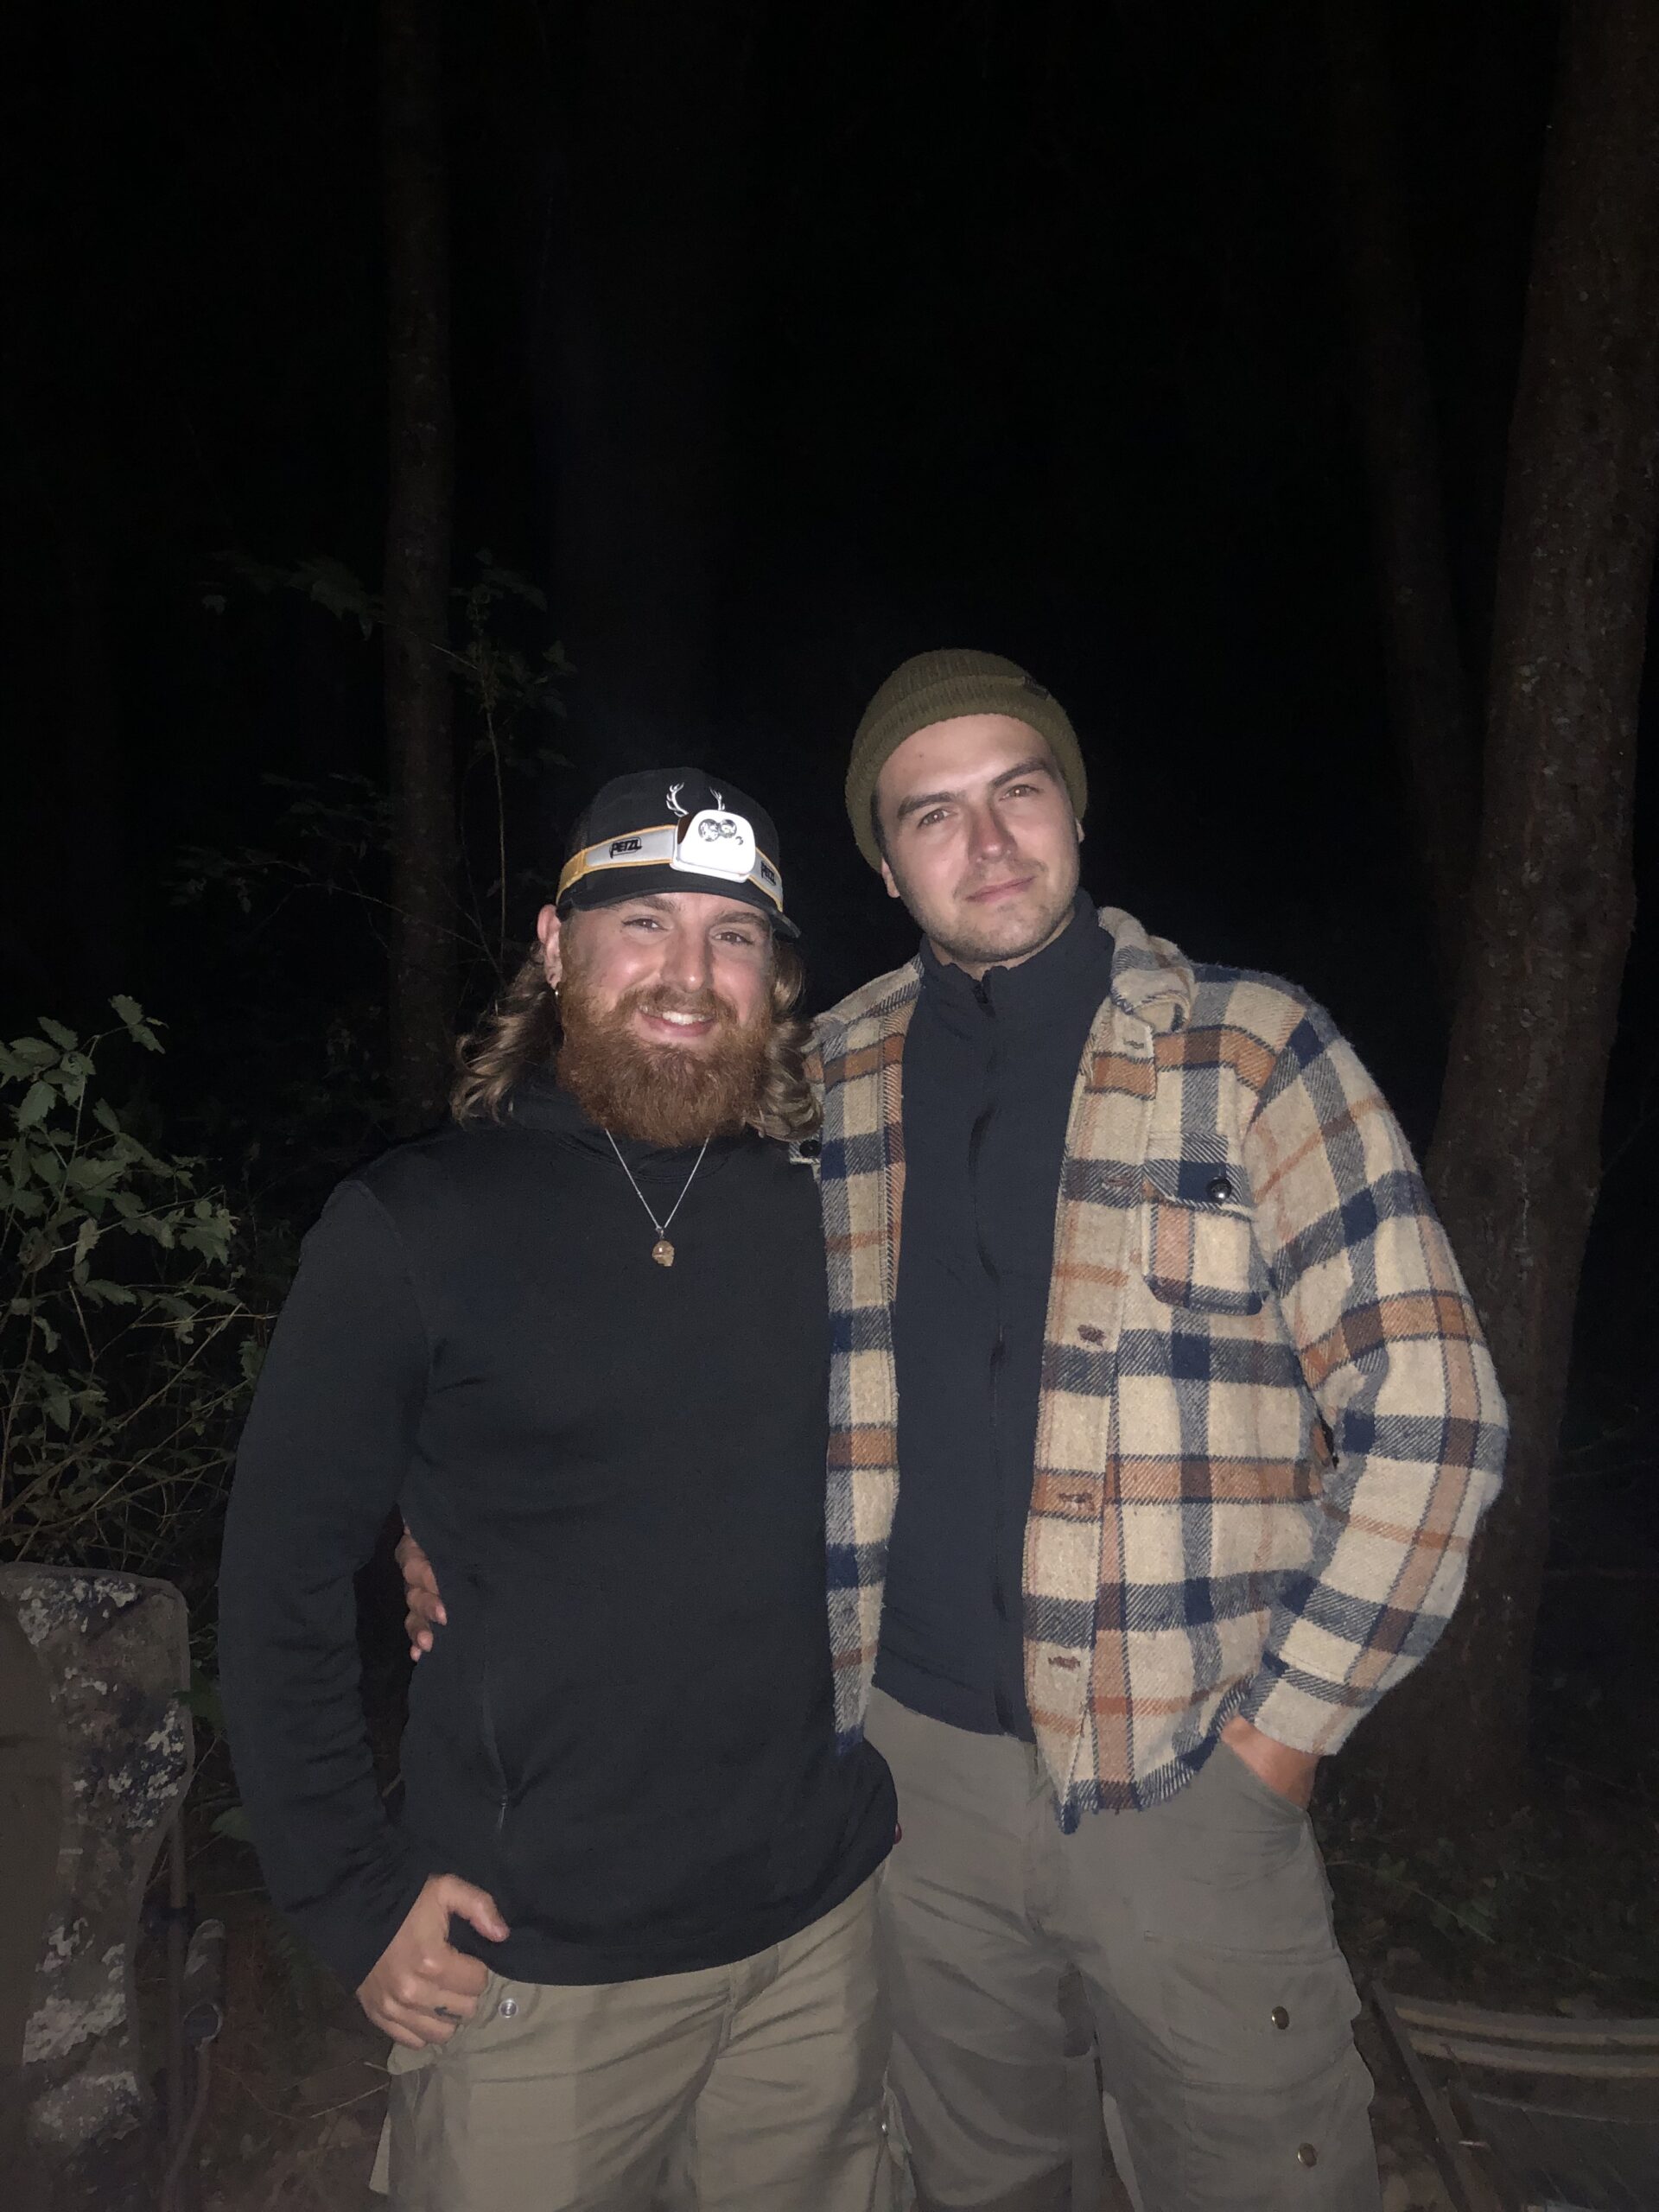 Two VIU students pose for a picture in a dark forest. They are waiting for the timer to go off so they can check the bird traps.